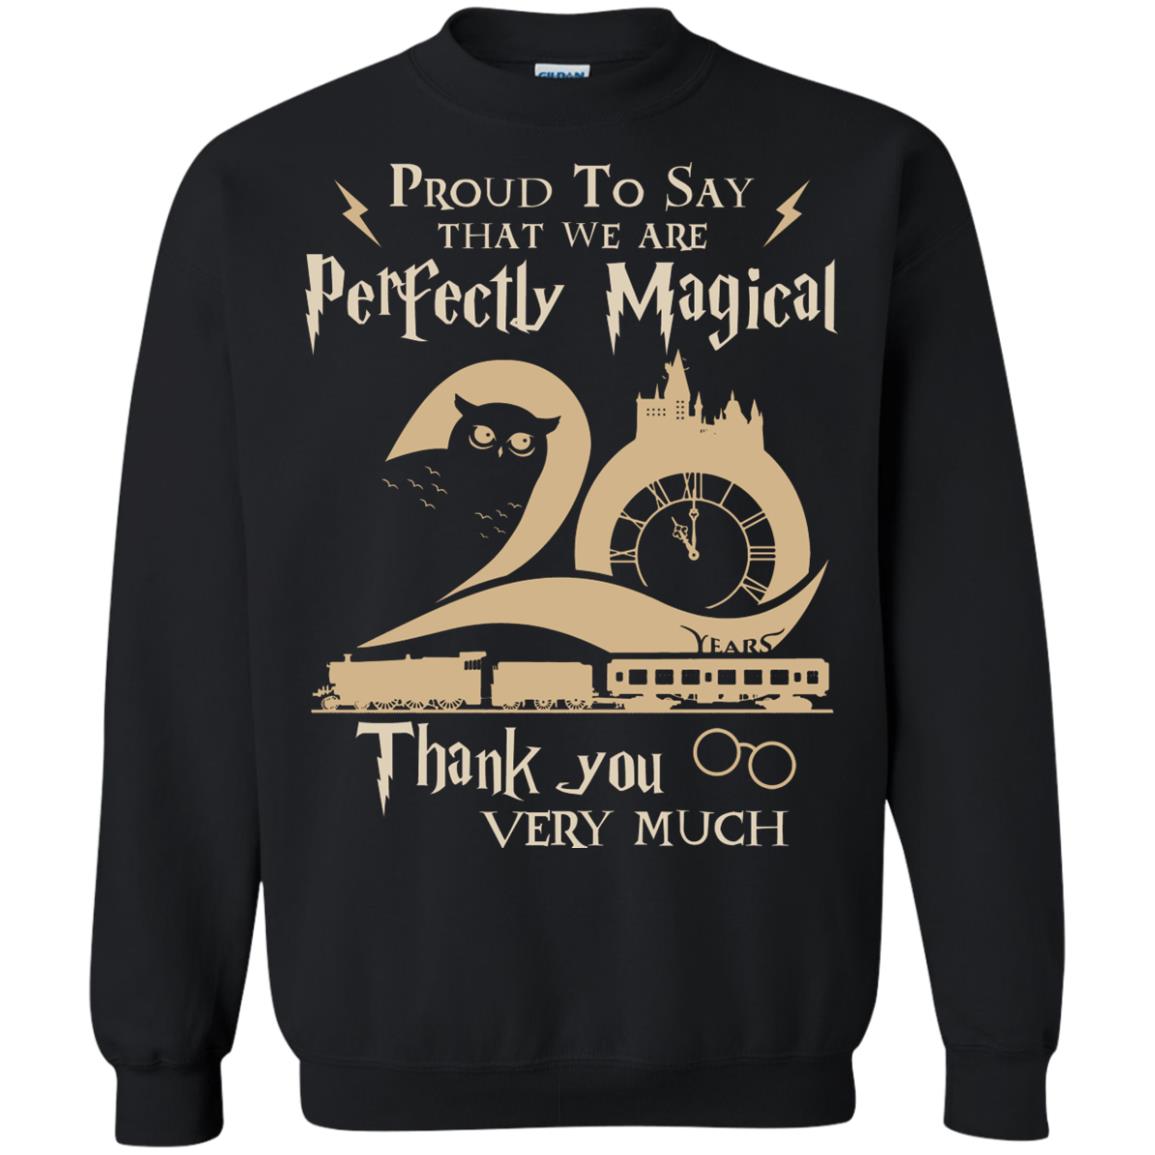 Proud To Say That We Are Perfectly Magical  Thank You Very Much Harry Potter Fan T-shirtG180 Gildan Crewneck Pullover Sweatshirt 8 oz.